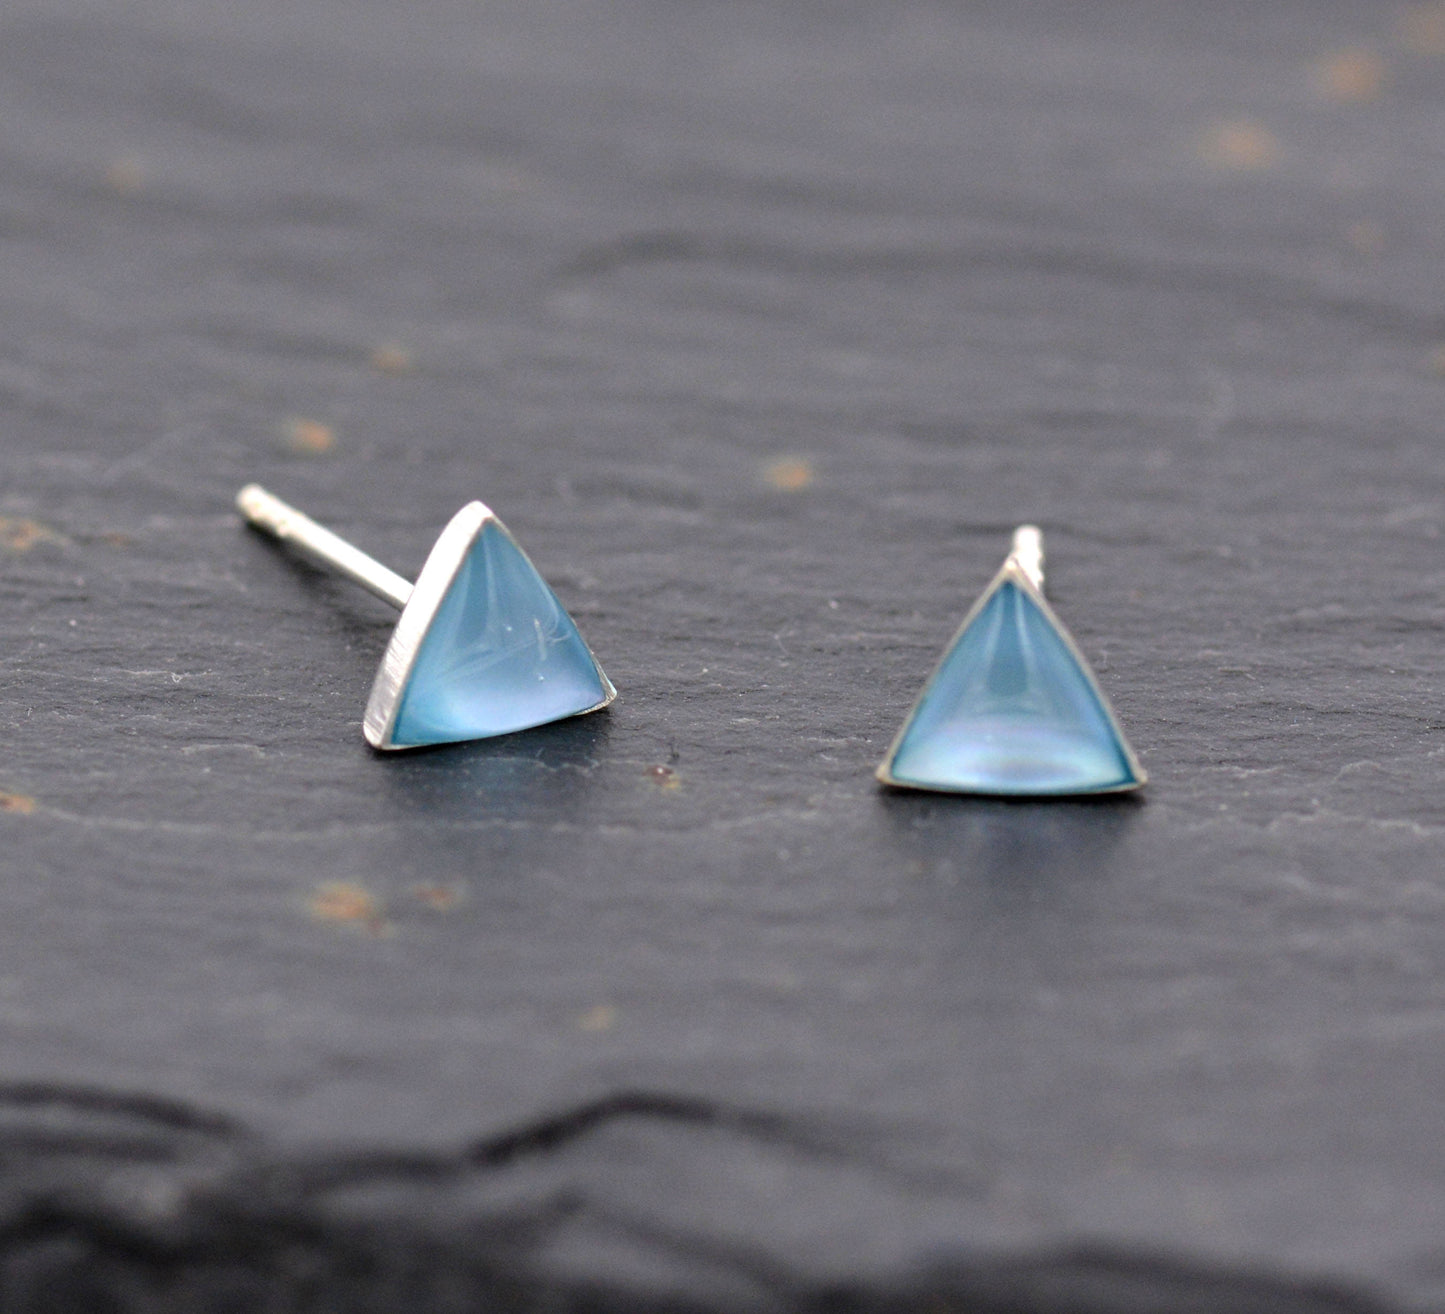 Sterling Silver Very Tiny Maldive Blue Triangle Stud Earrings with Resin Glaze - Simple and Discreet - Geometric and Minimalist